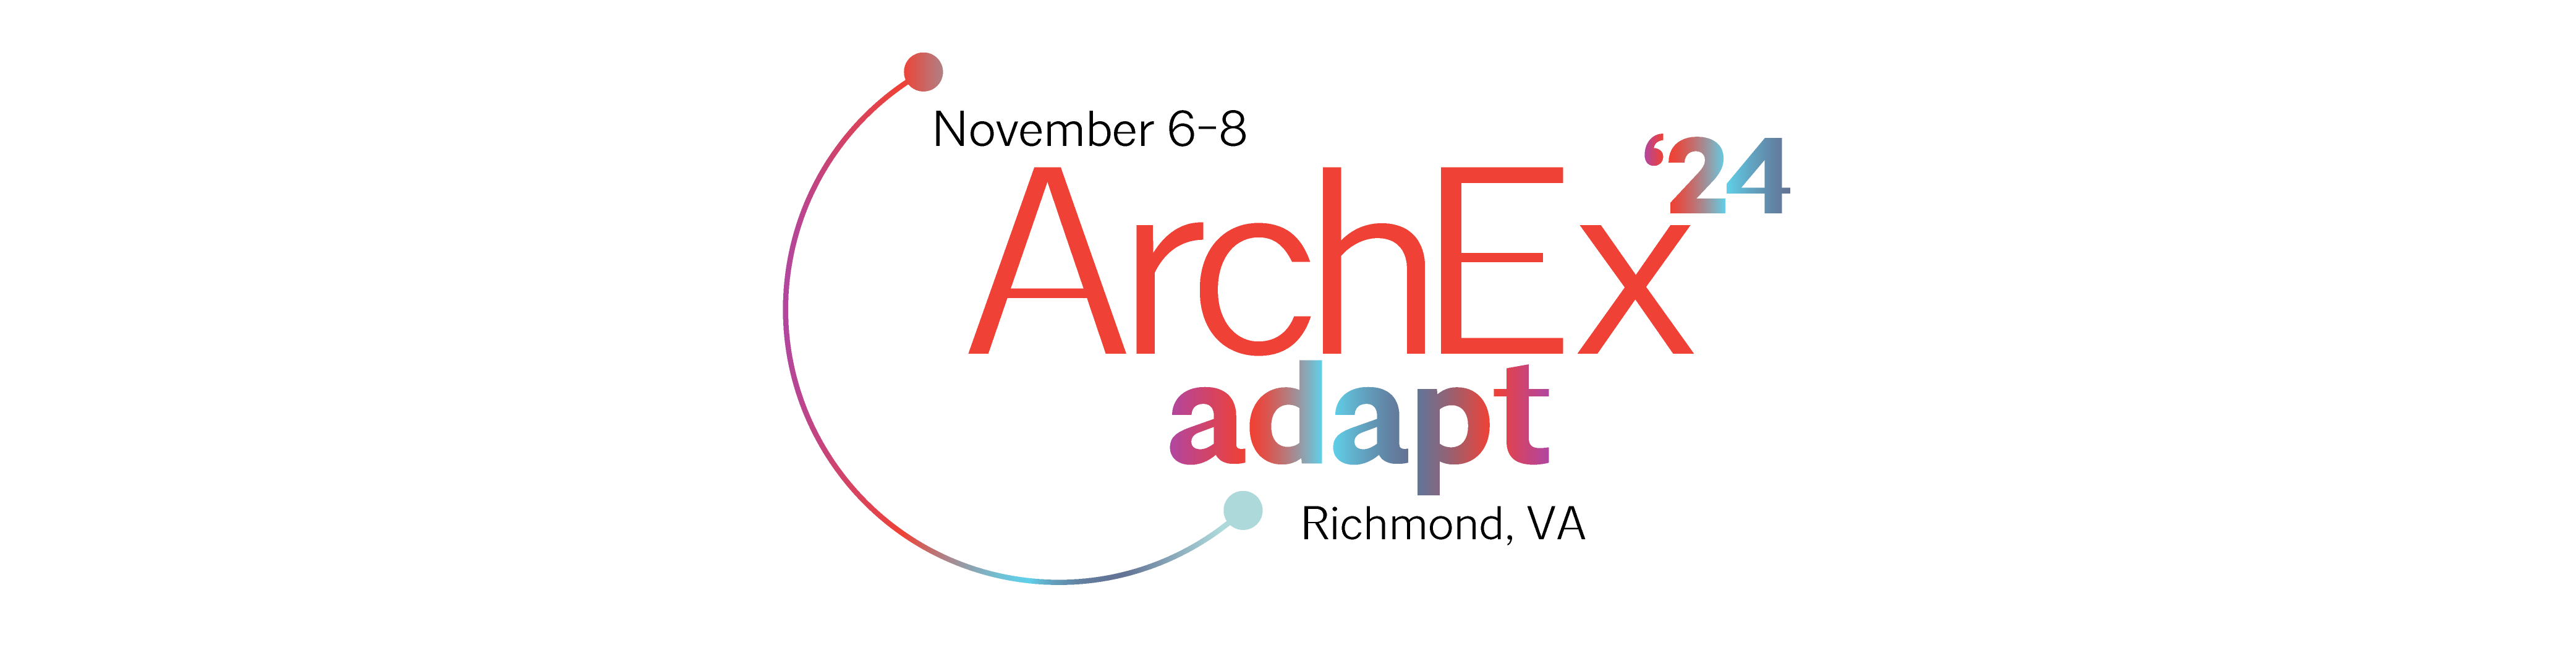 Registration Opening Soon: ArchEx ’24